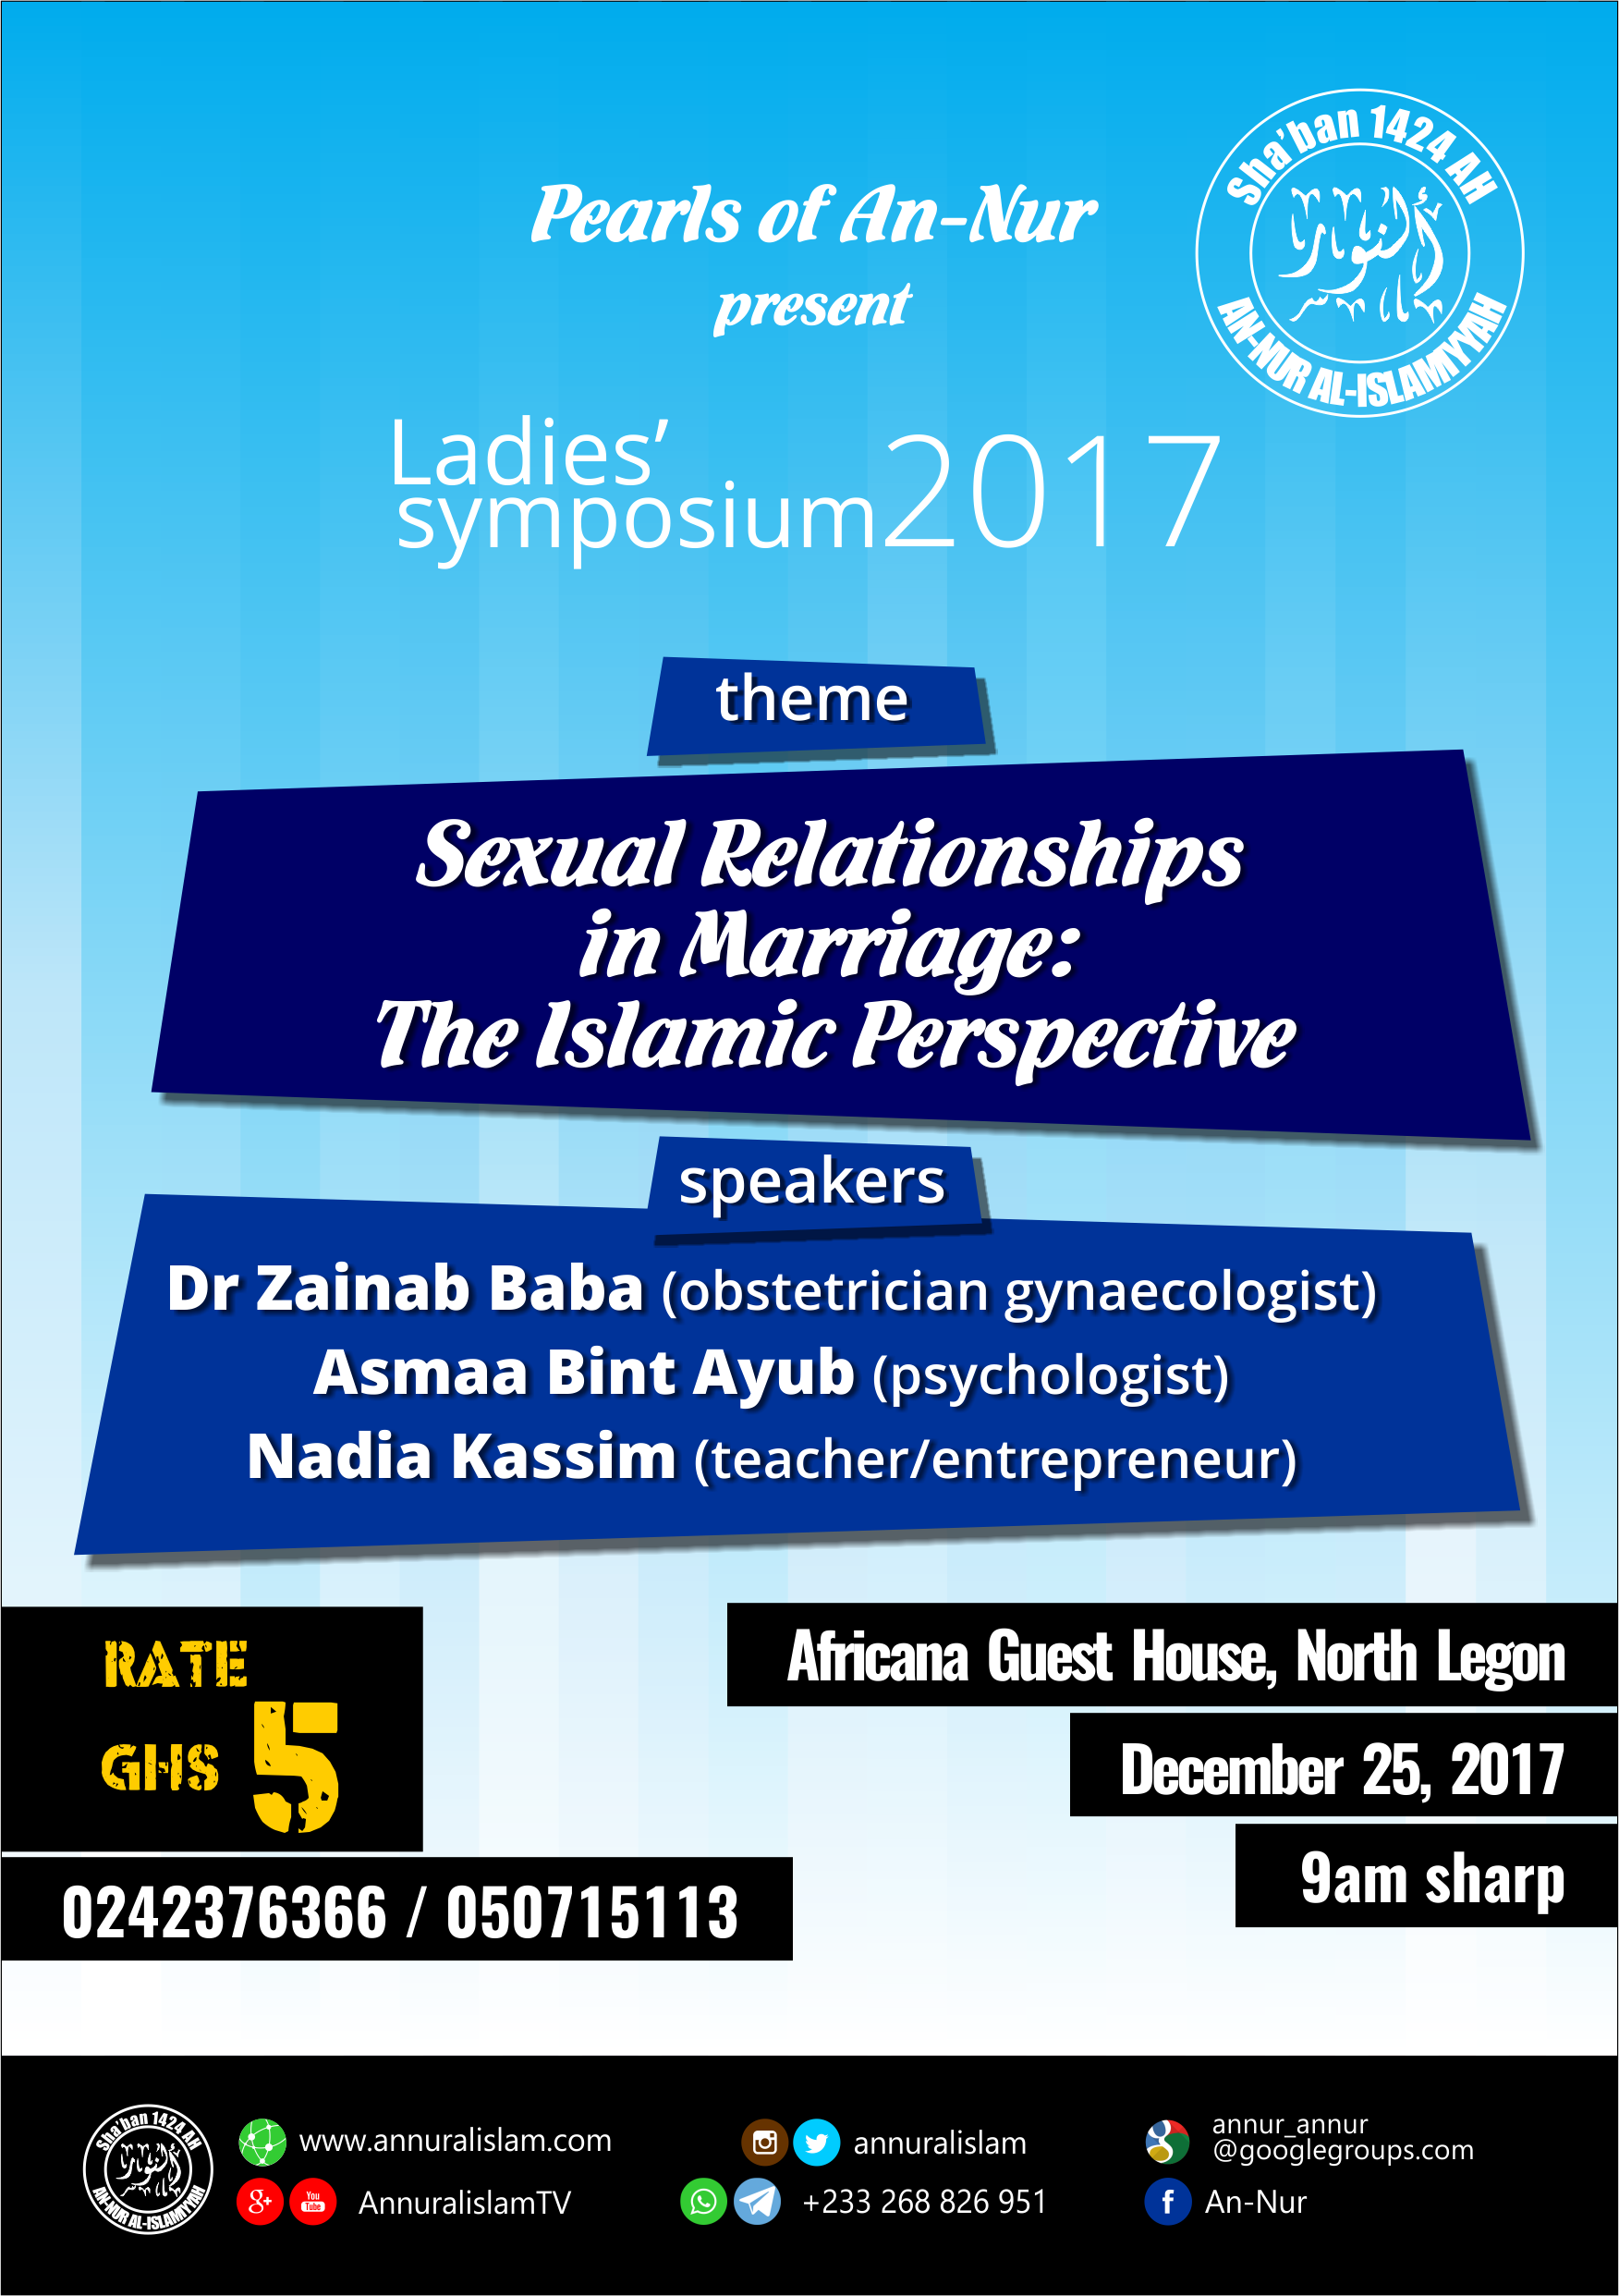 Sexual relations in marriage: The Islamic perspective